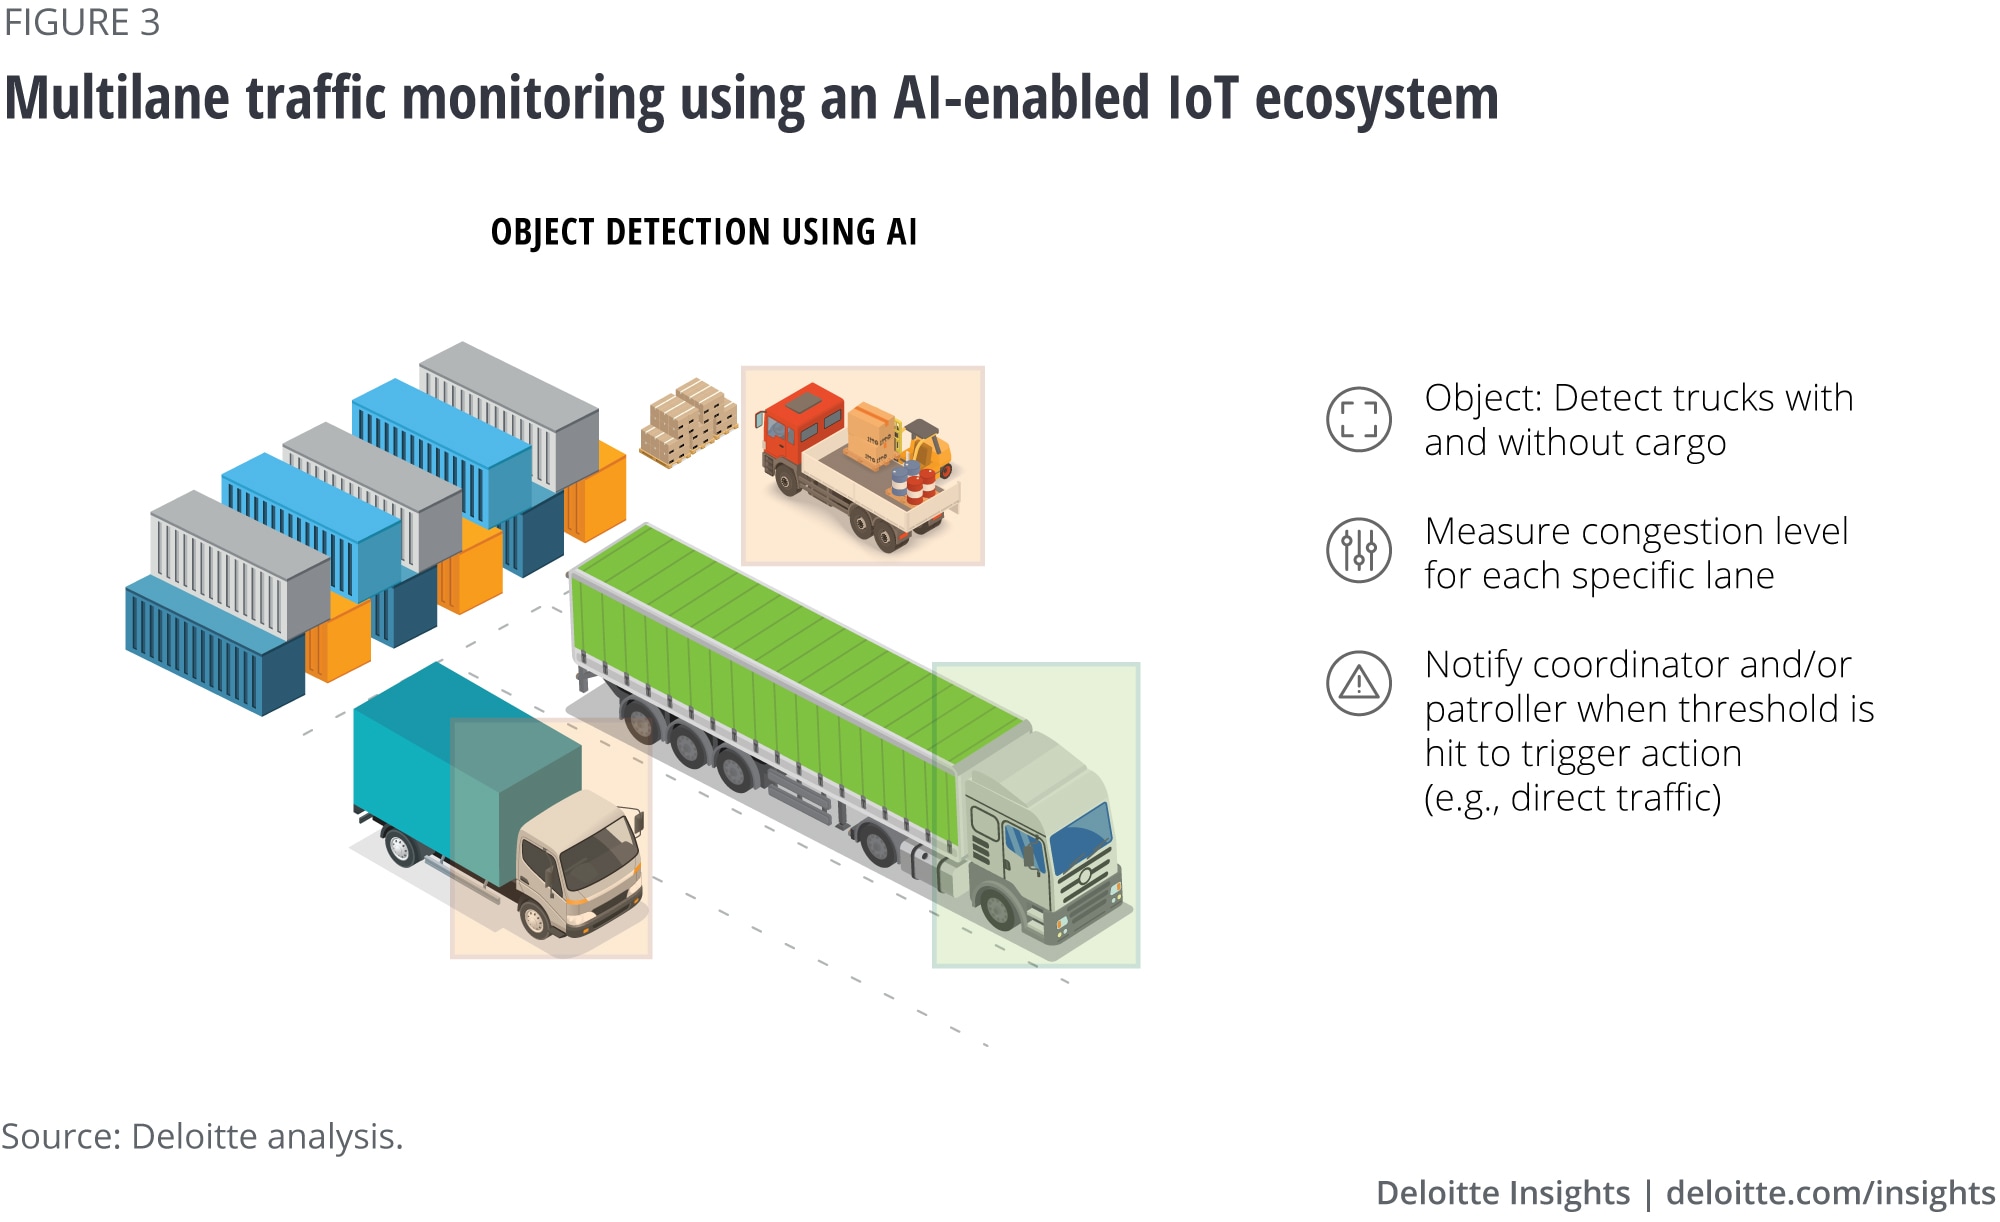 Multilane traffic monitoring using an AI-enabled IoT ecosystem